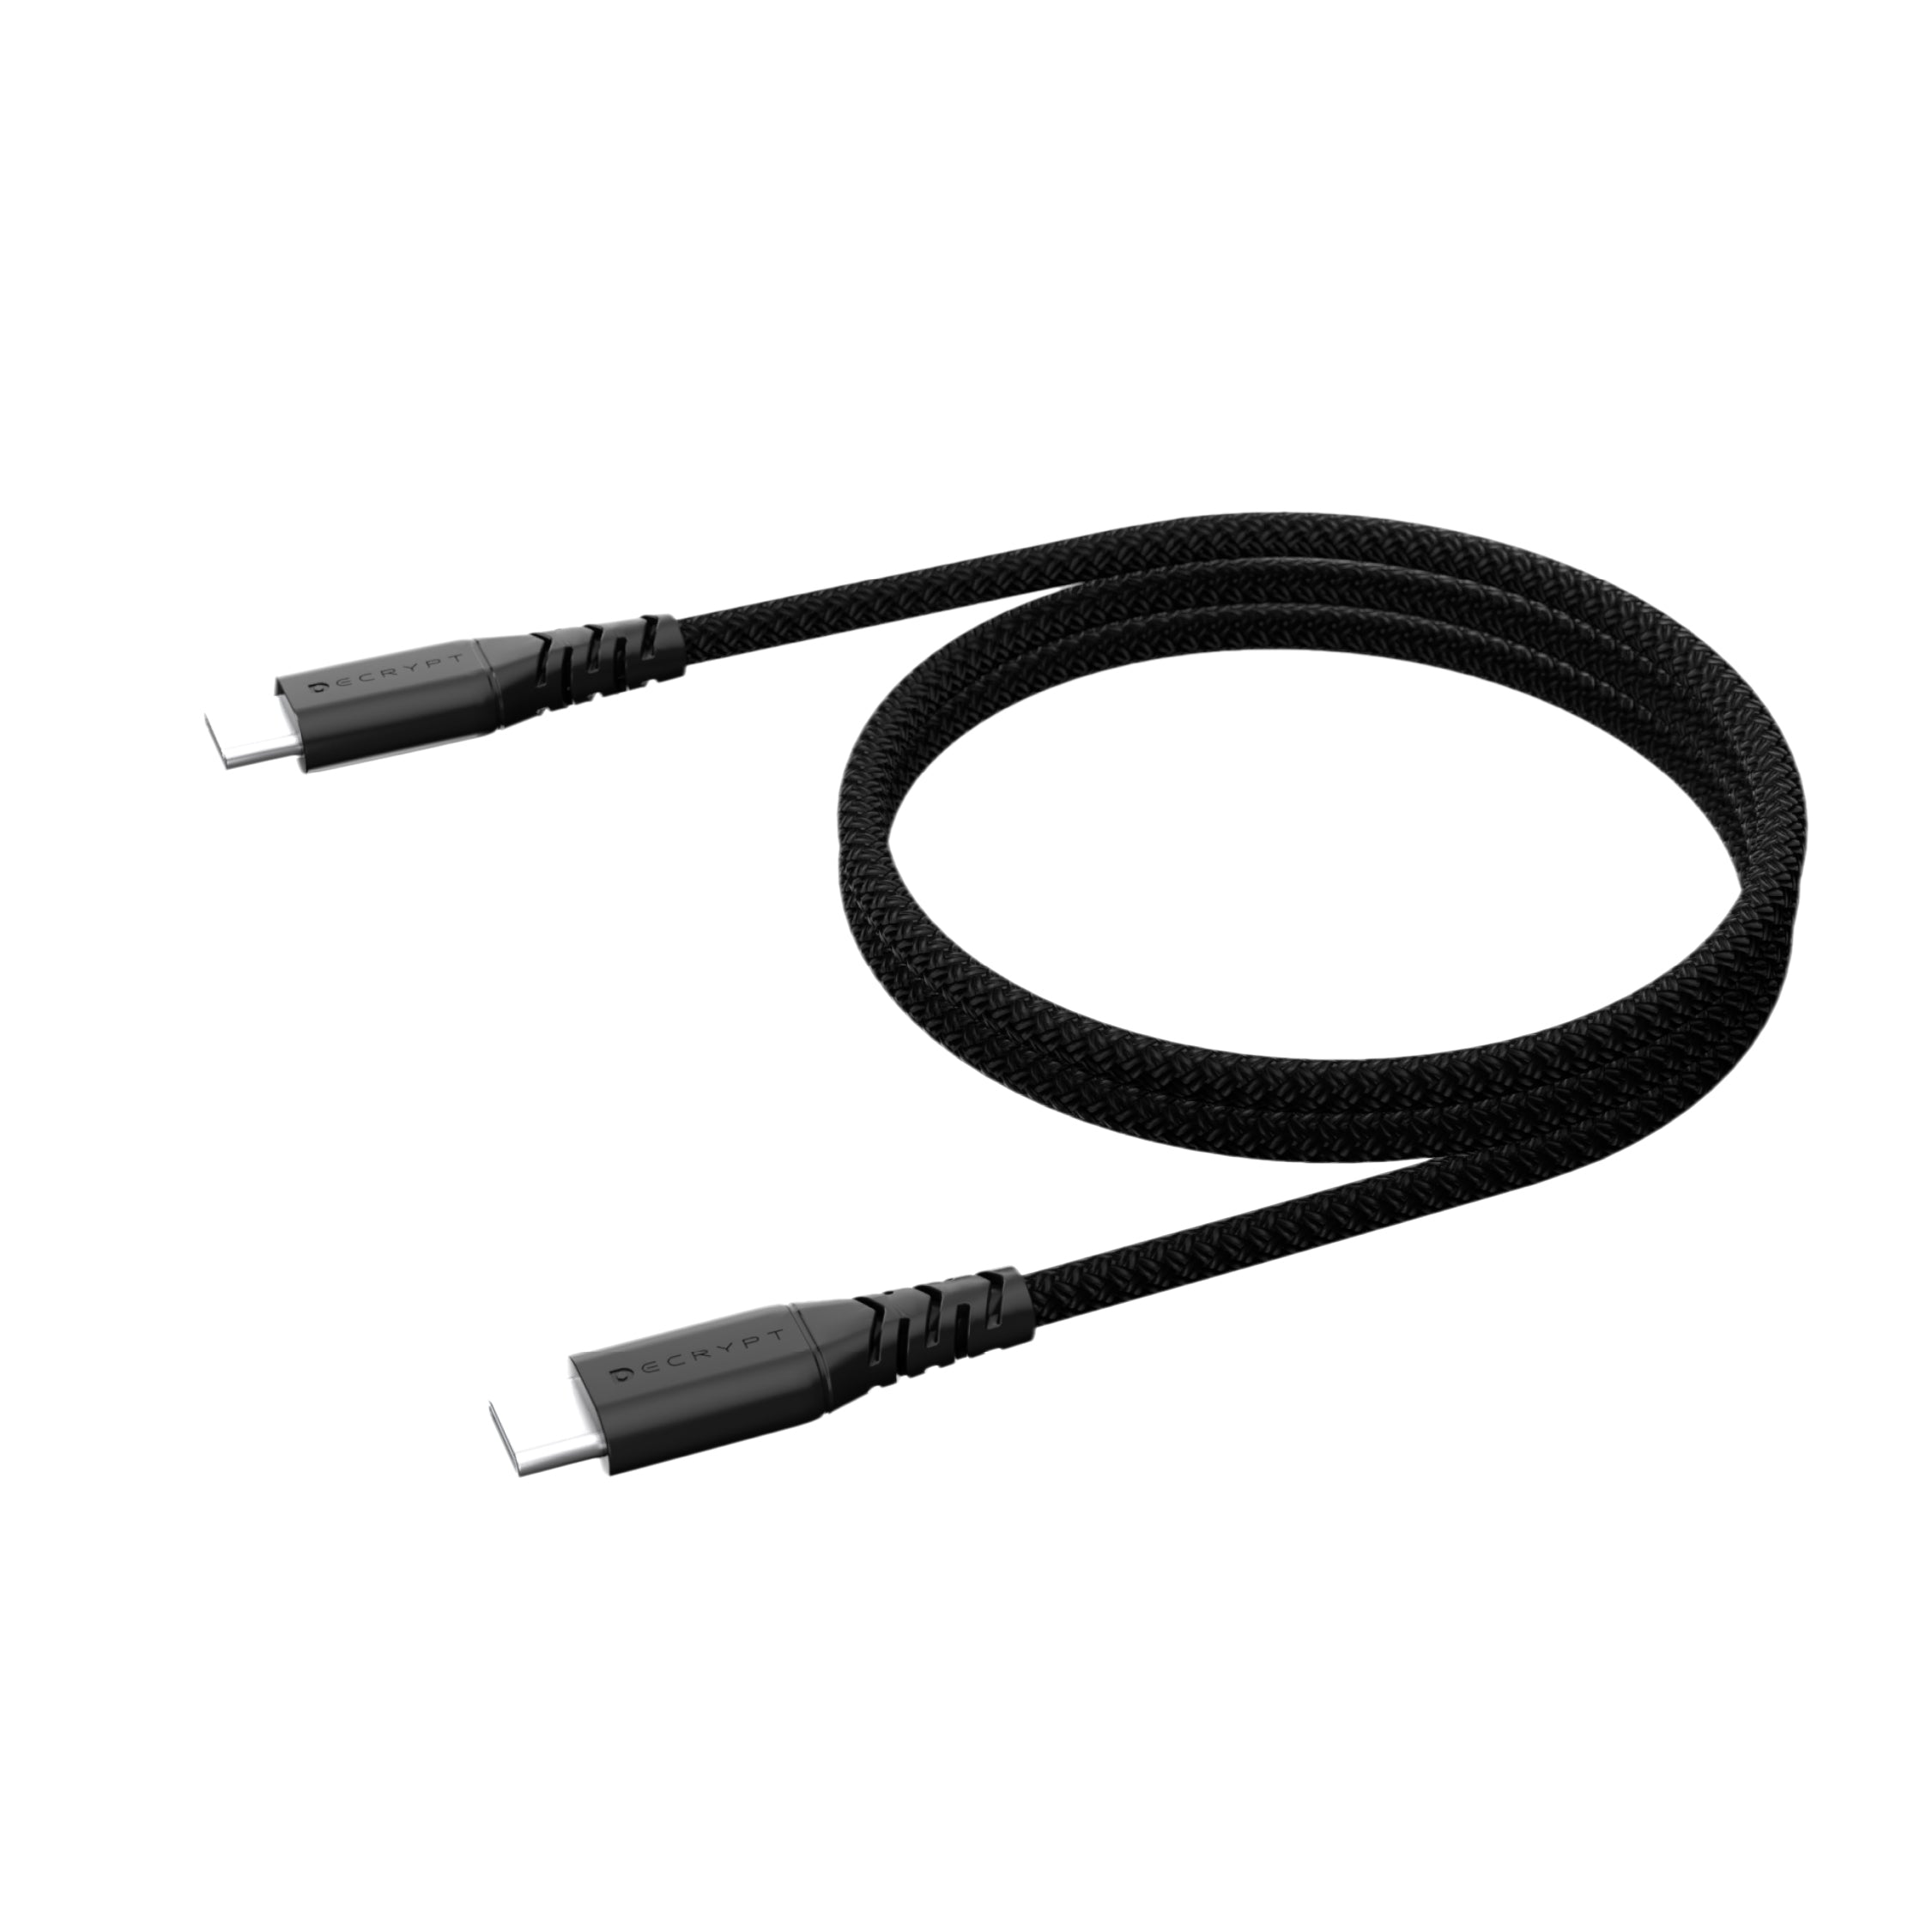 USB-C to USB-C Braided Cable - 2 Meter